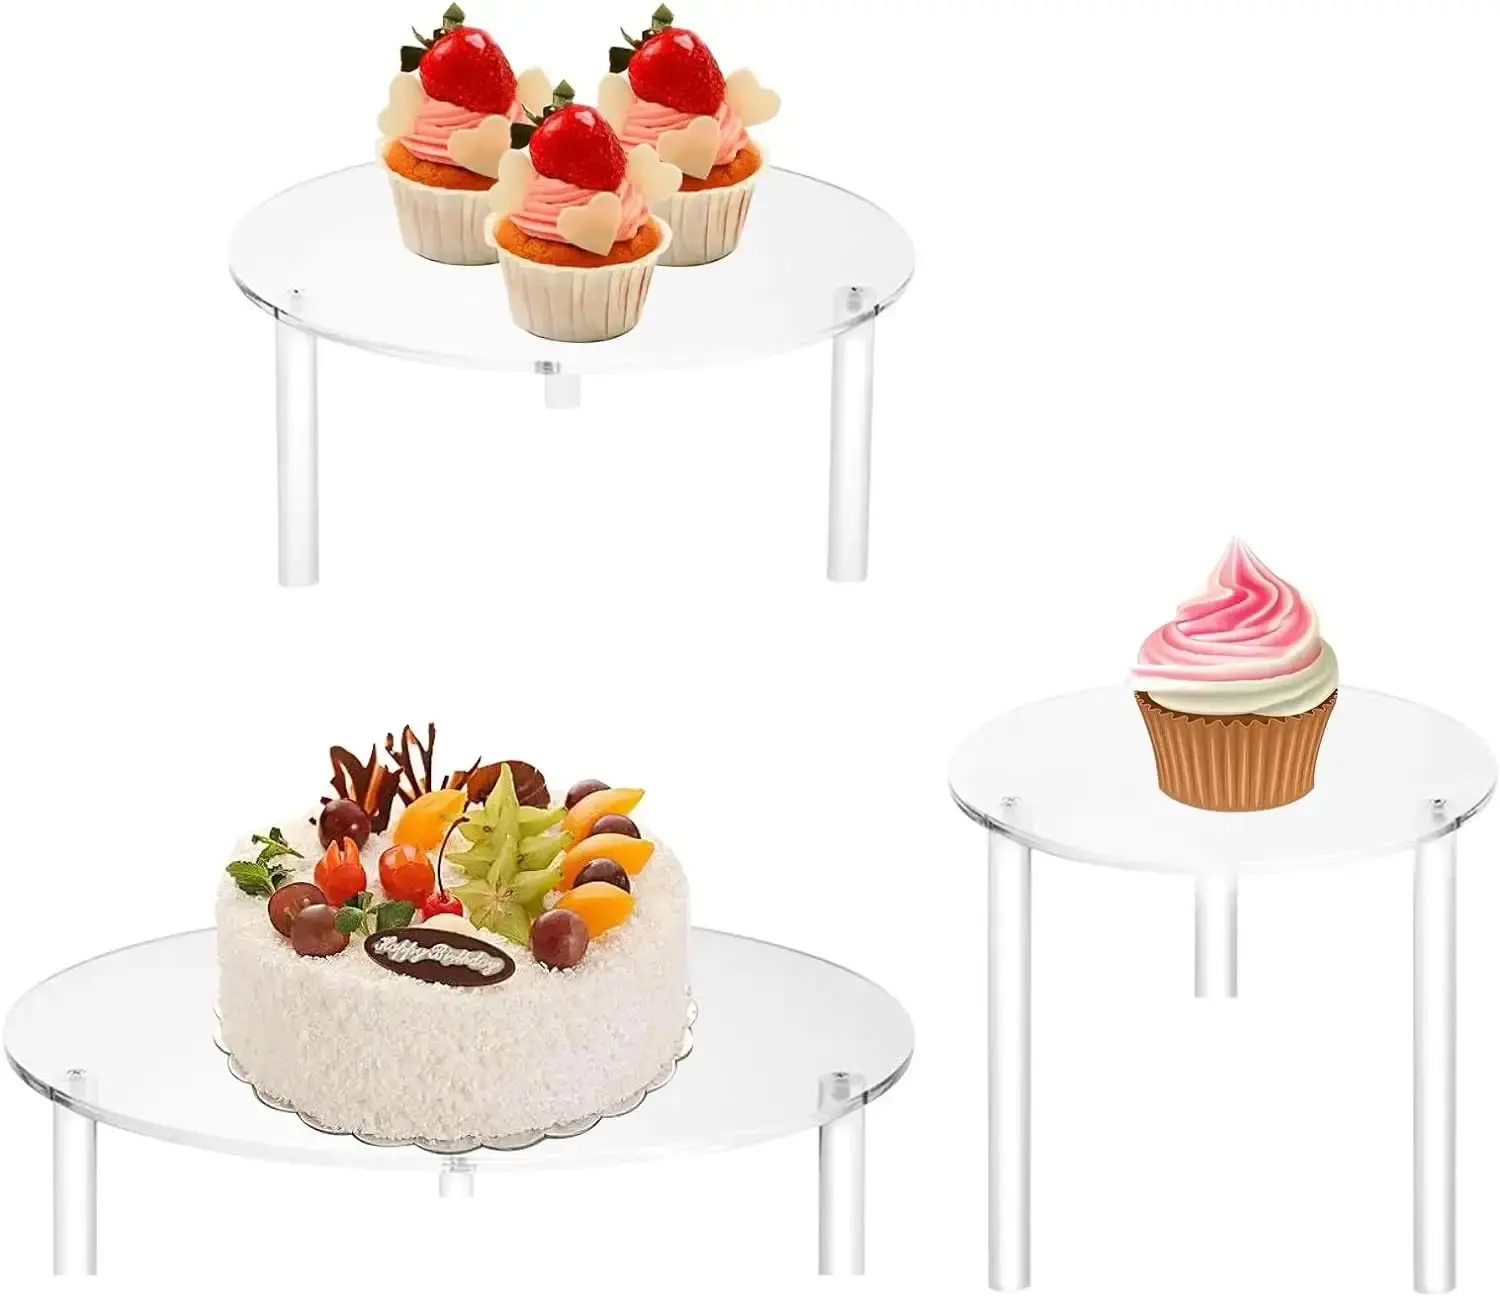 Wholesale Decorative Clear Round Acrylic Birthday Part Cupcake Wedding Cake Stand for Display Only